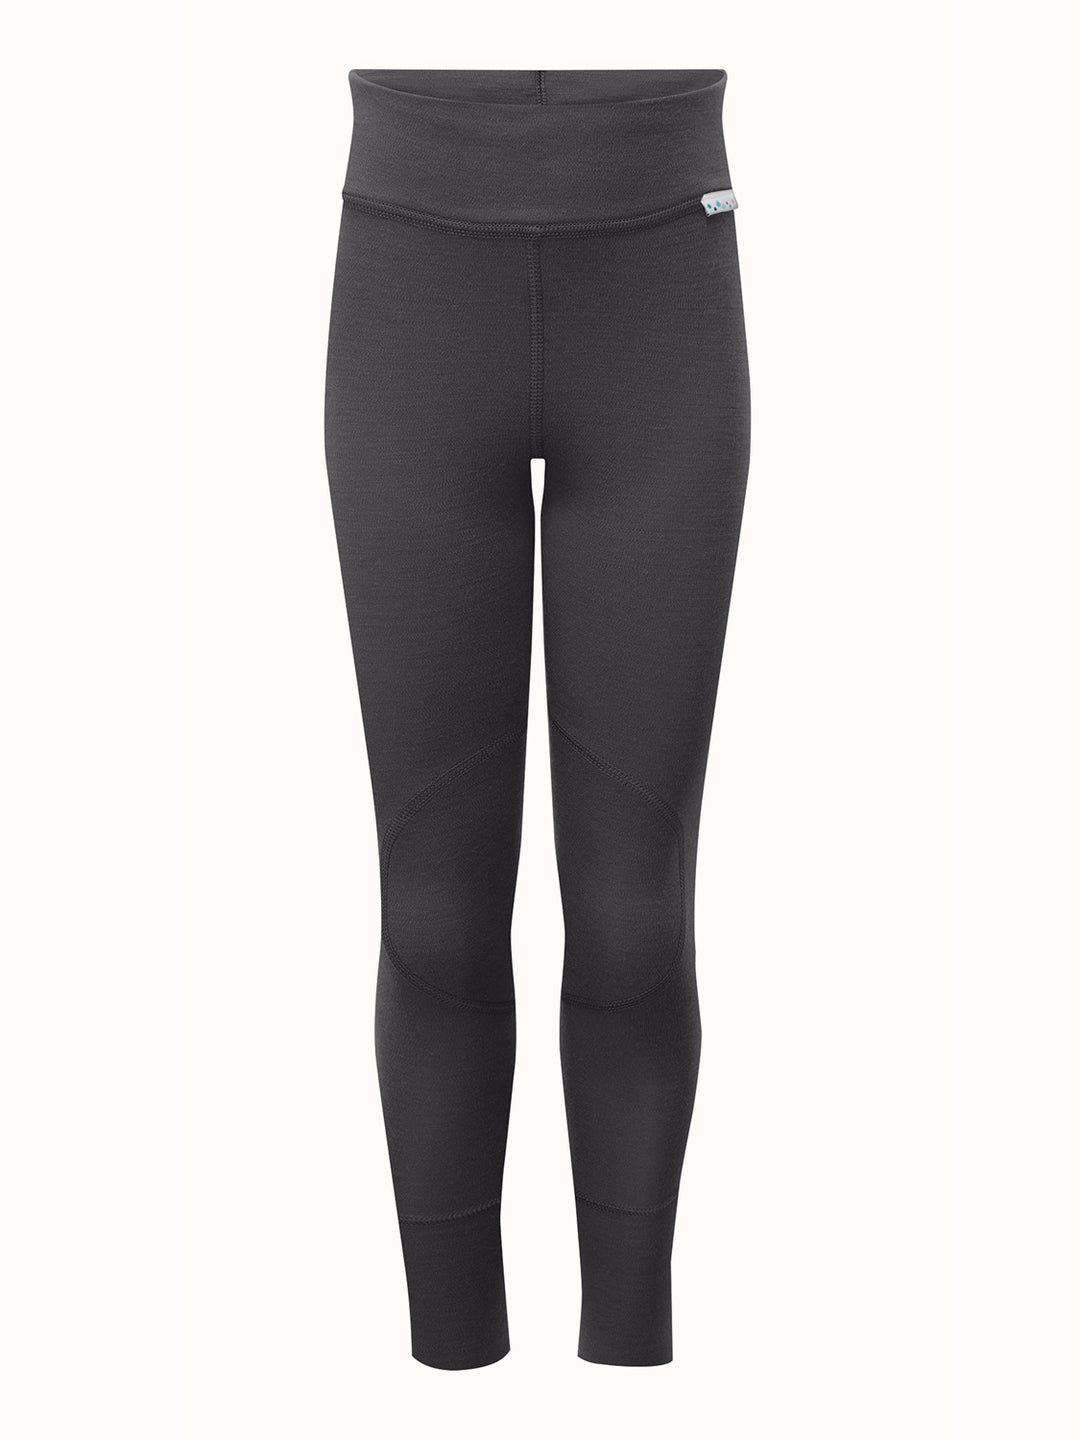 Rhino Baselayer Leggings for Juniors - Print & Embroidery Available – teeone